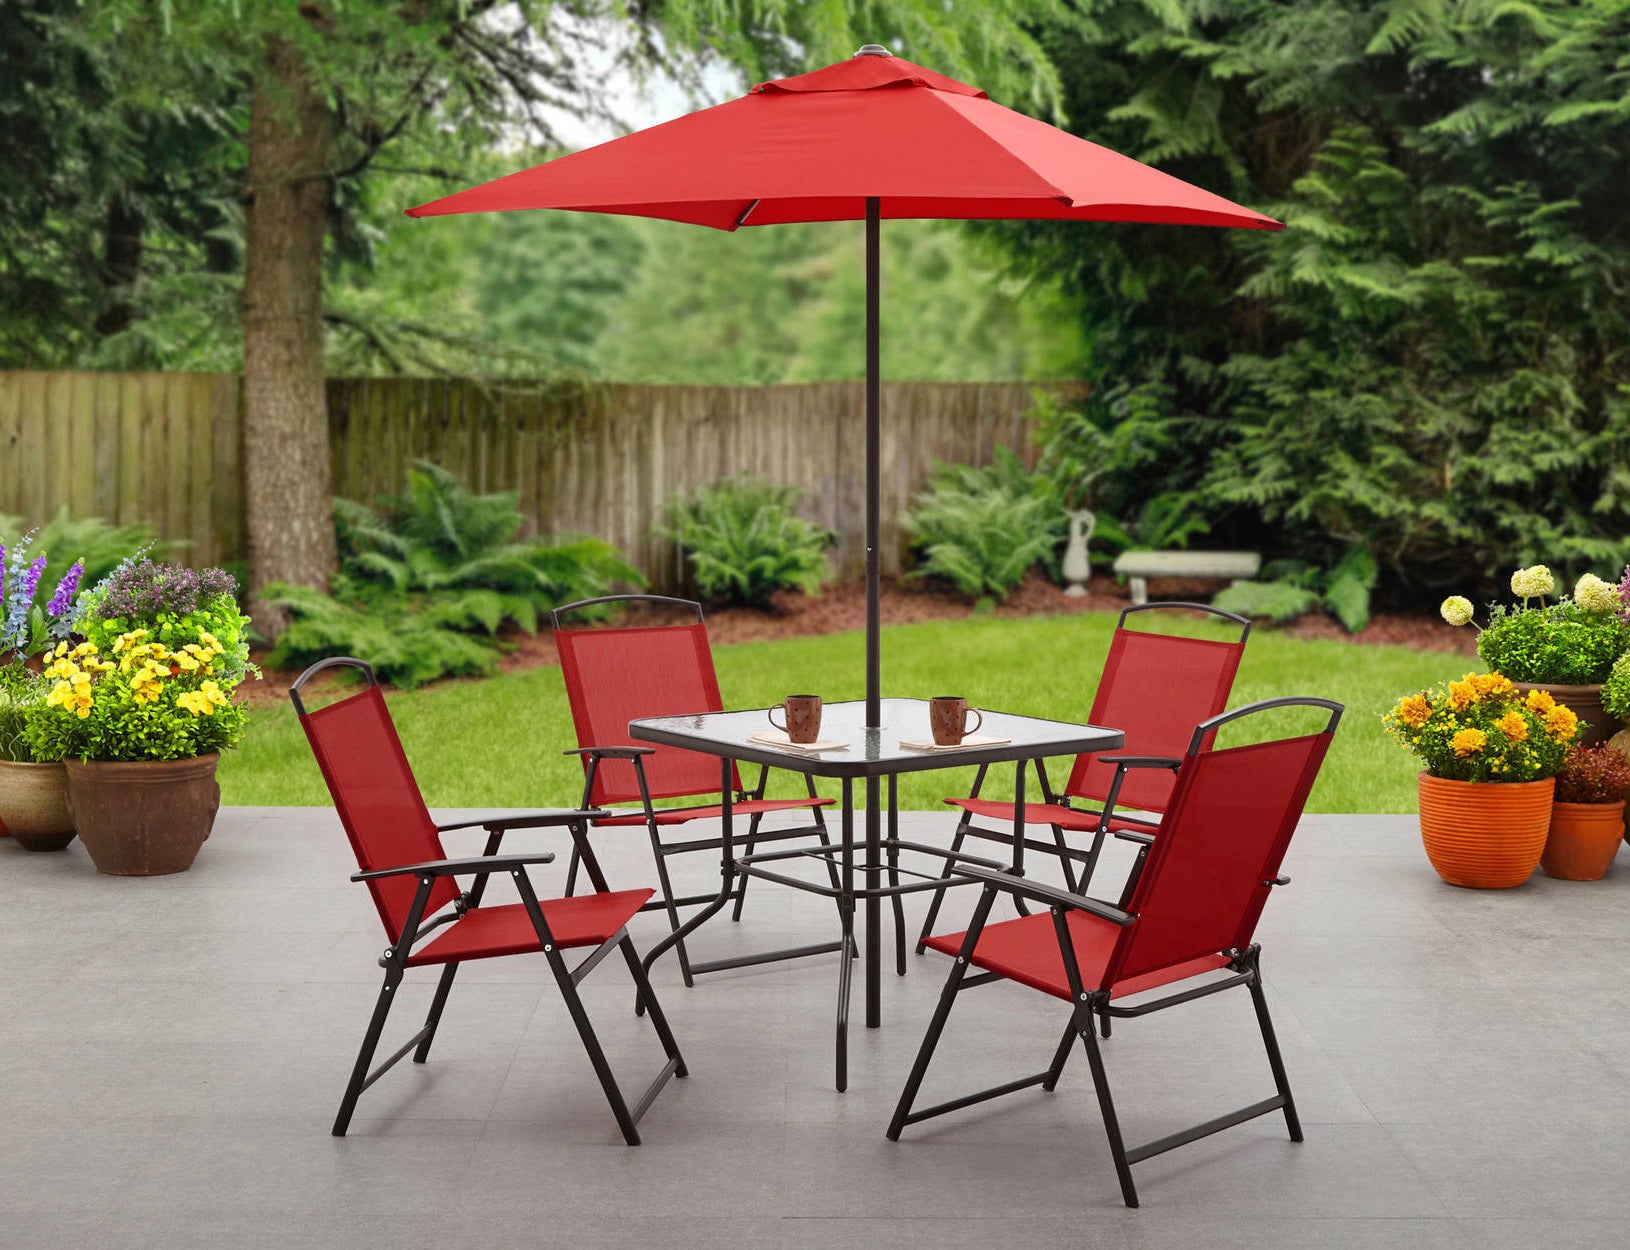 The patio set in red